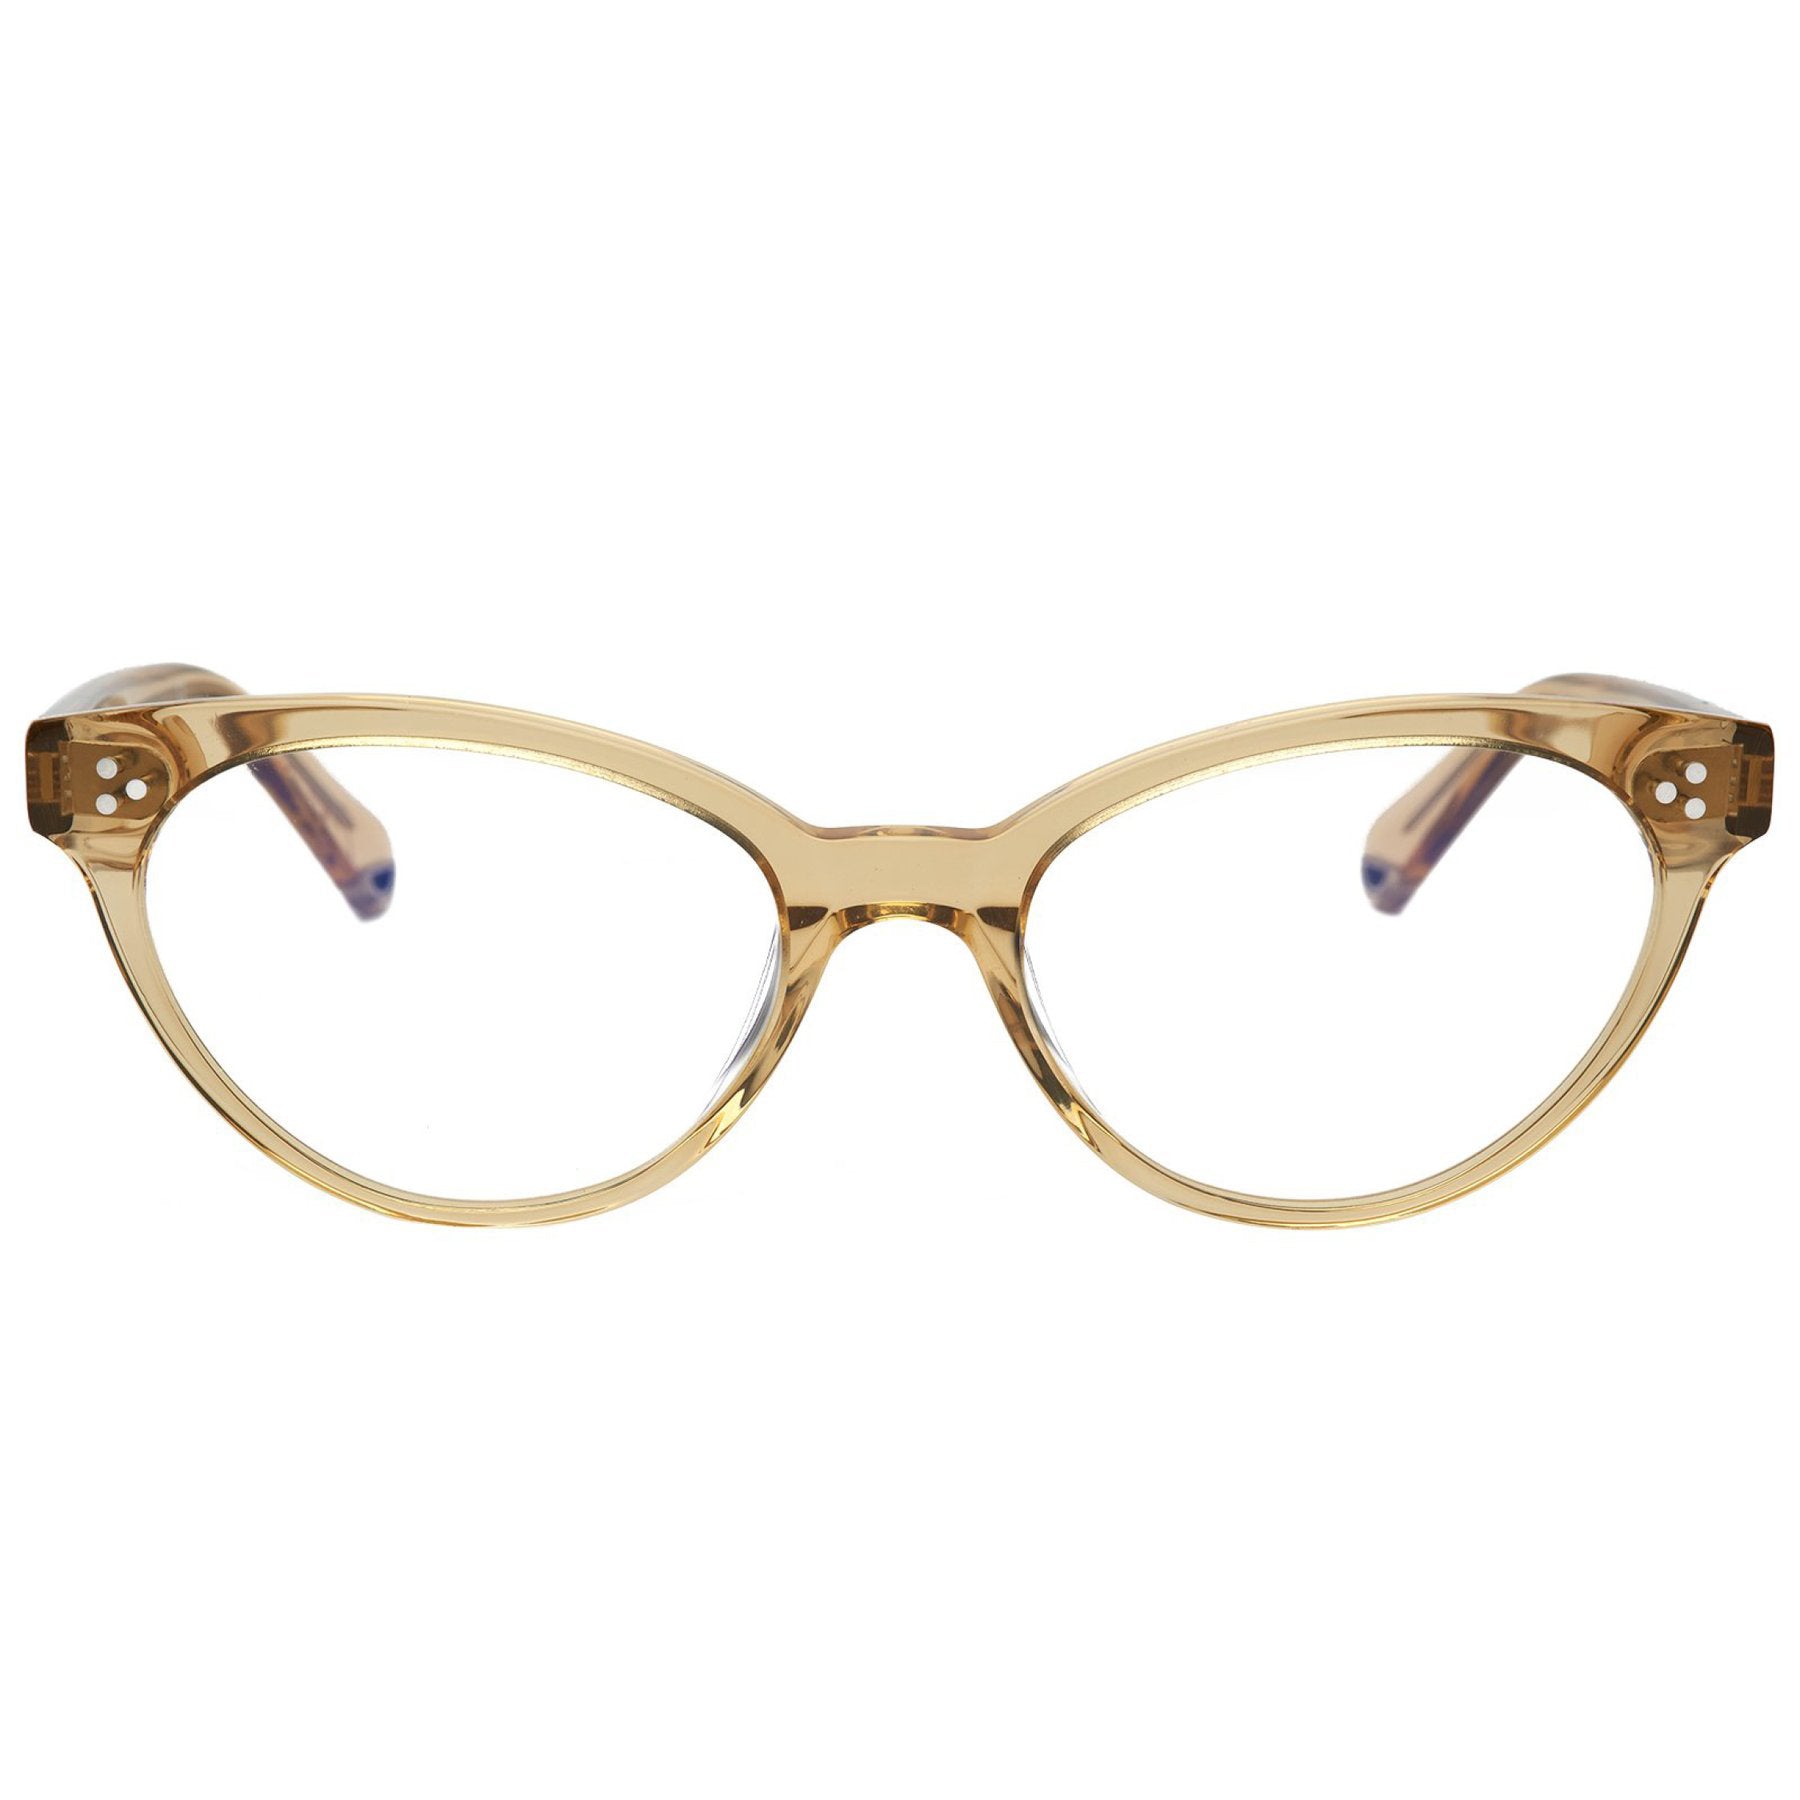 PACIFICO OPTICAL FRANCIS - CHAMPAGNE WITH BLUE LIGHT LENSES